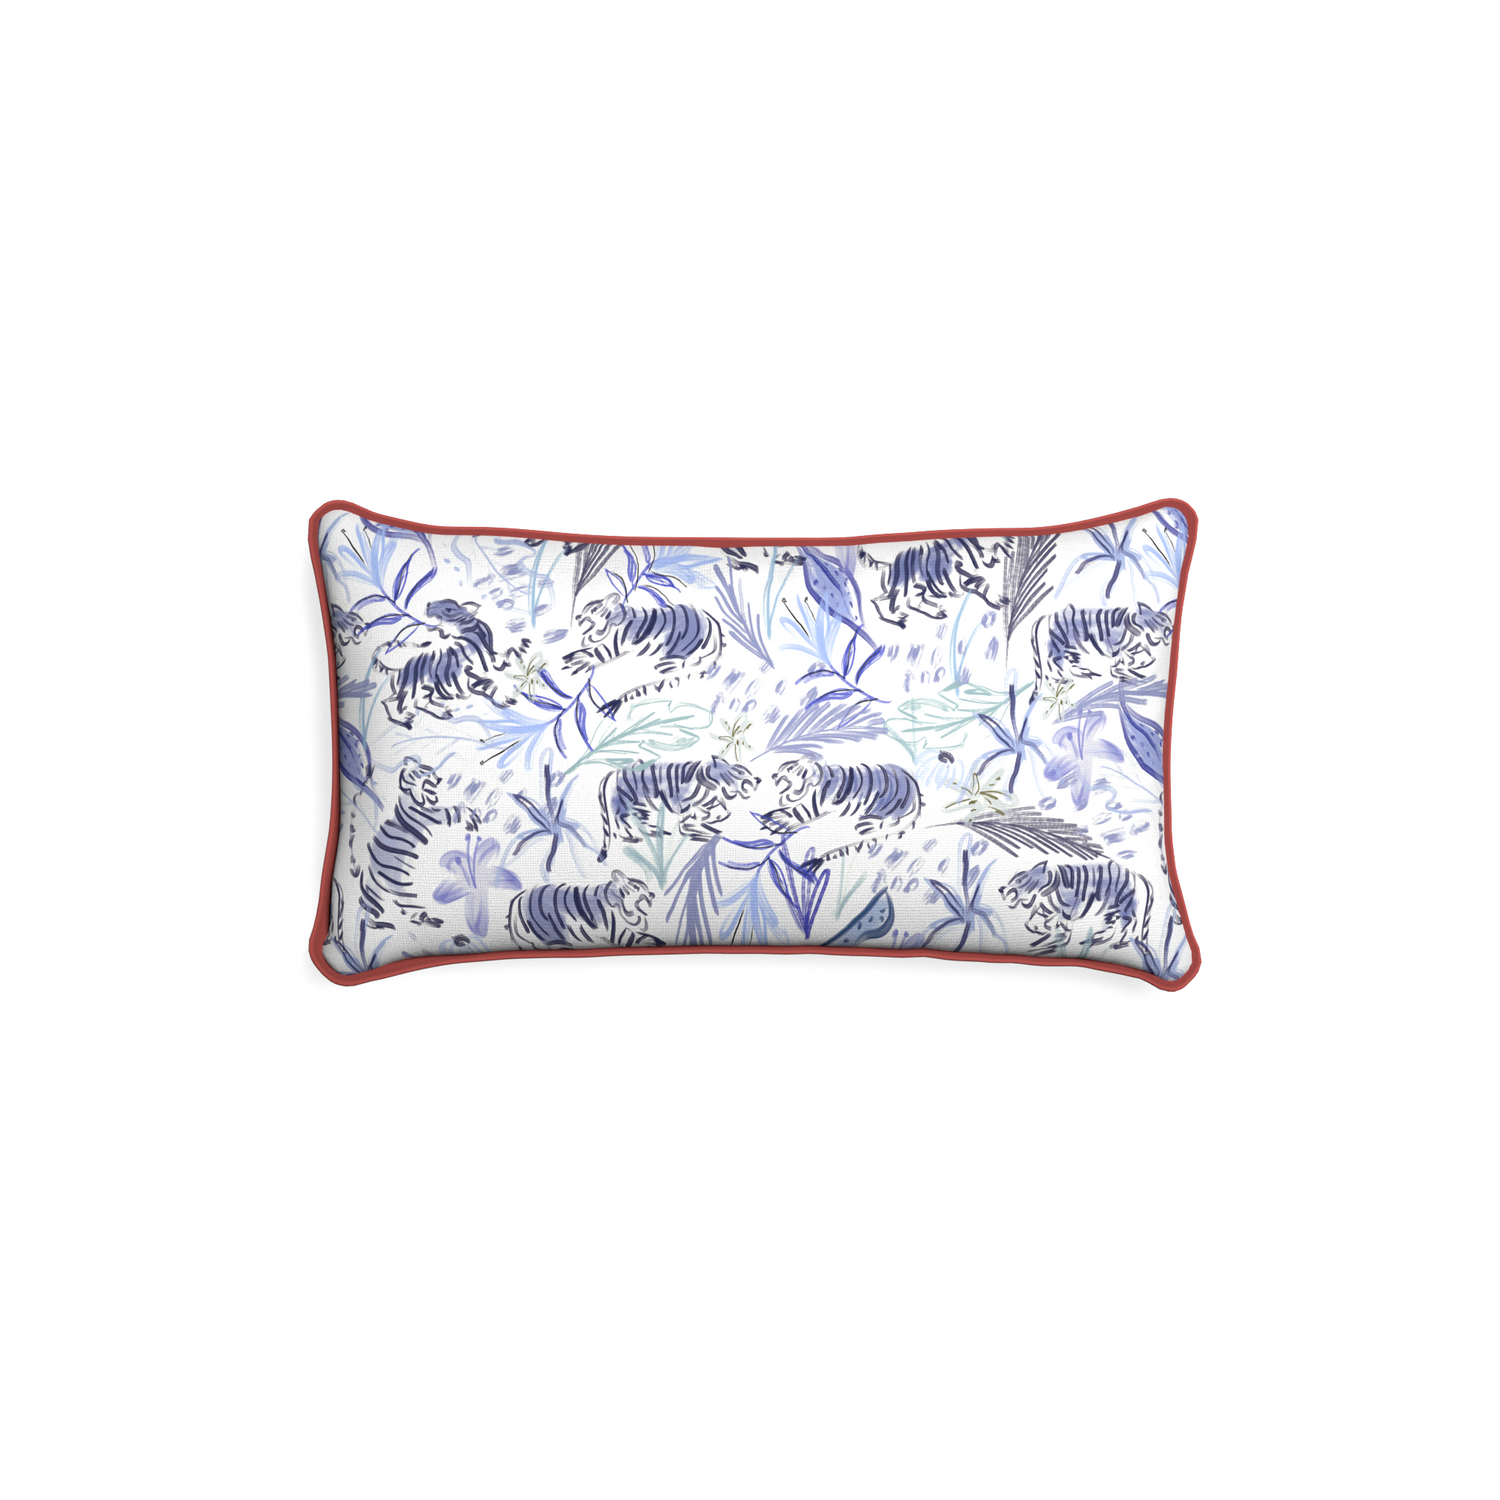 Petite-lumbar frida blue custom blue with intricate tiger designpillow with c piping on white background